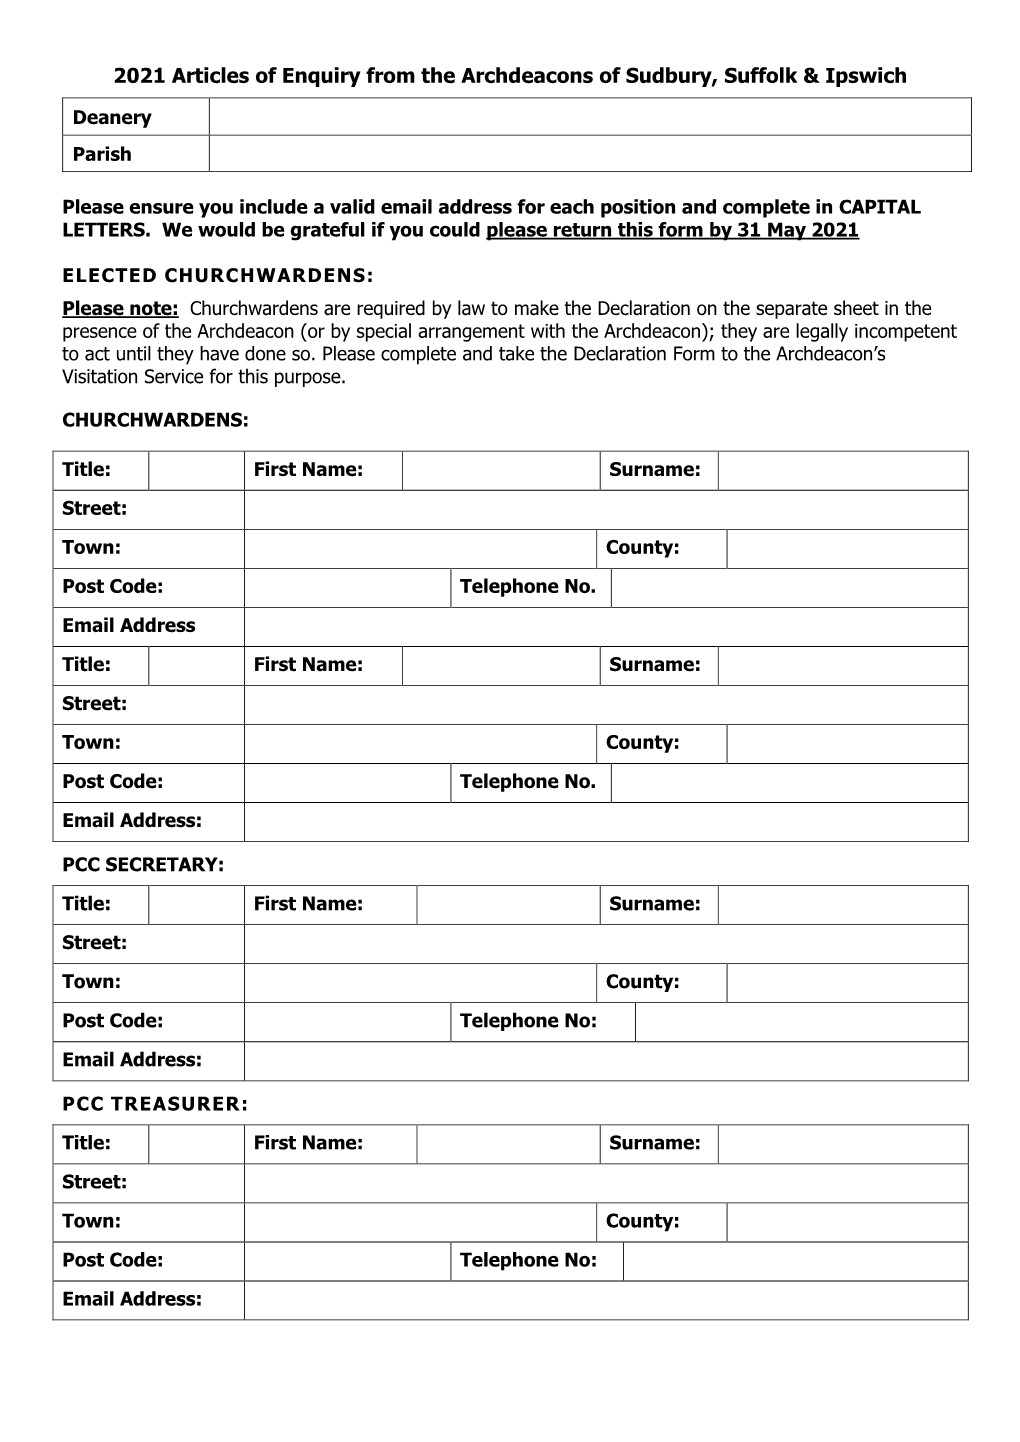 2010 Articles of Enquiry Form